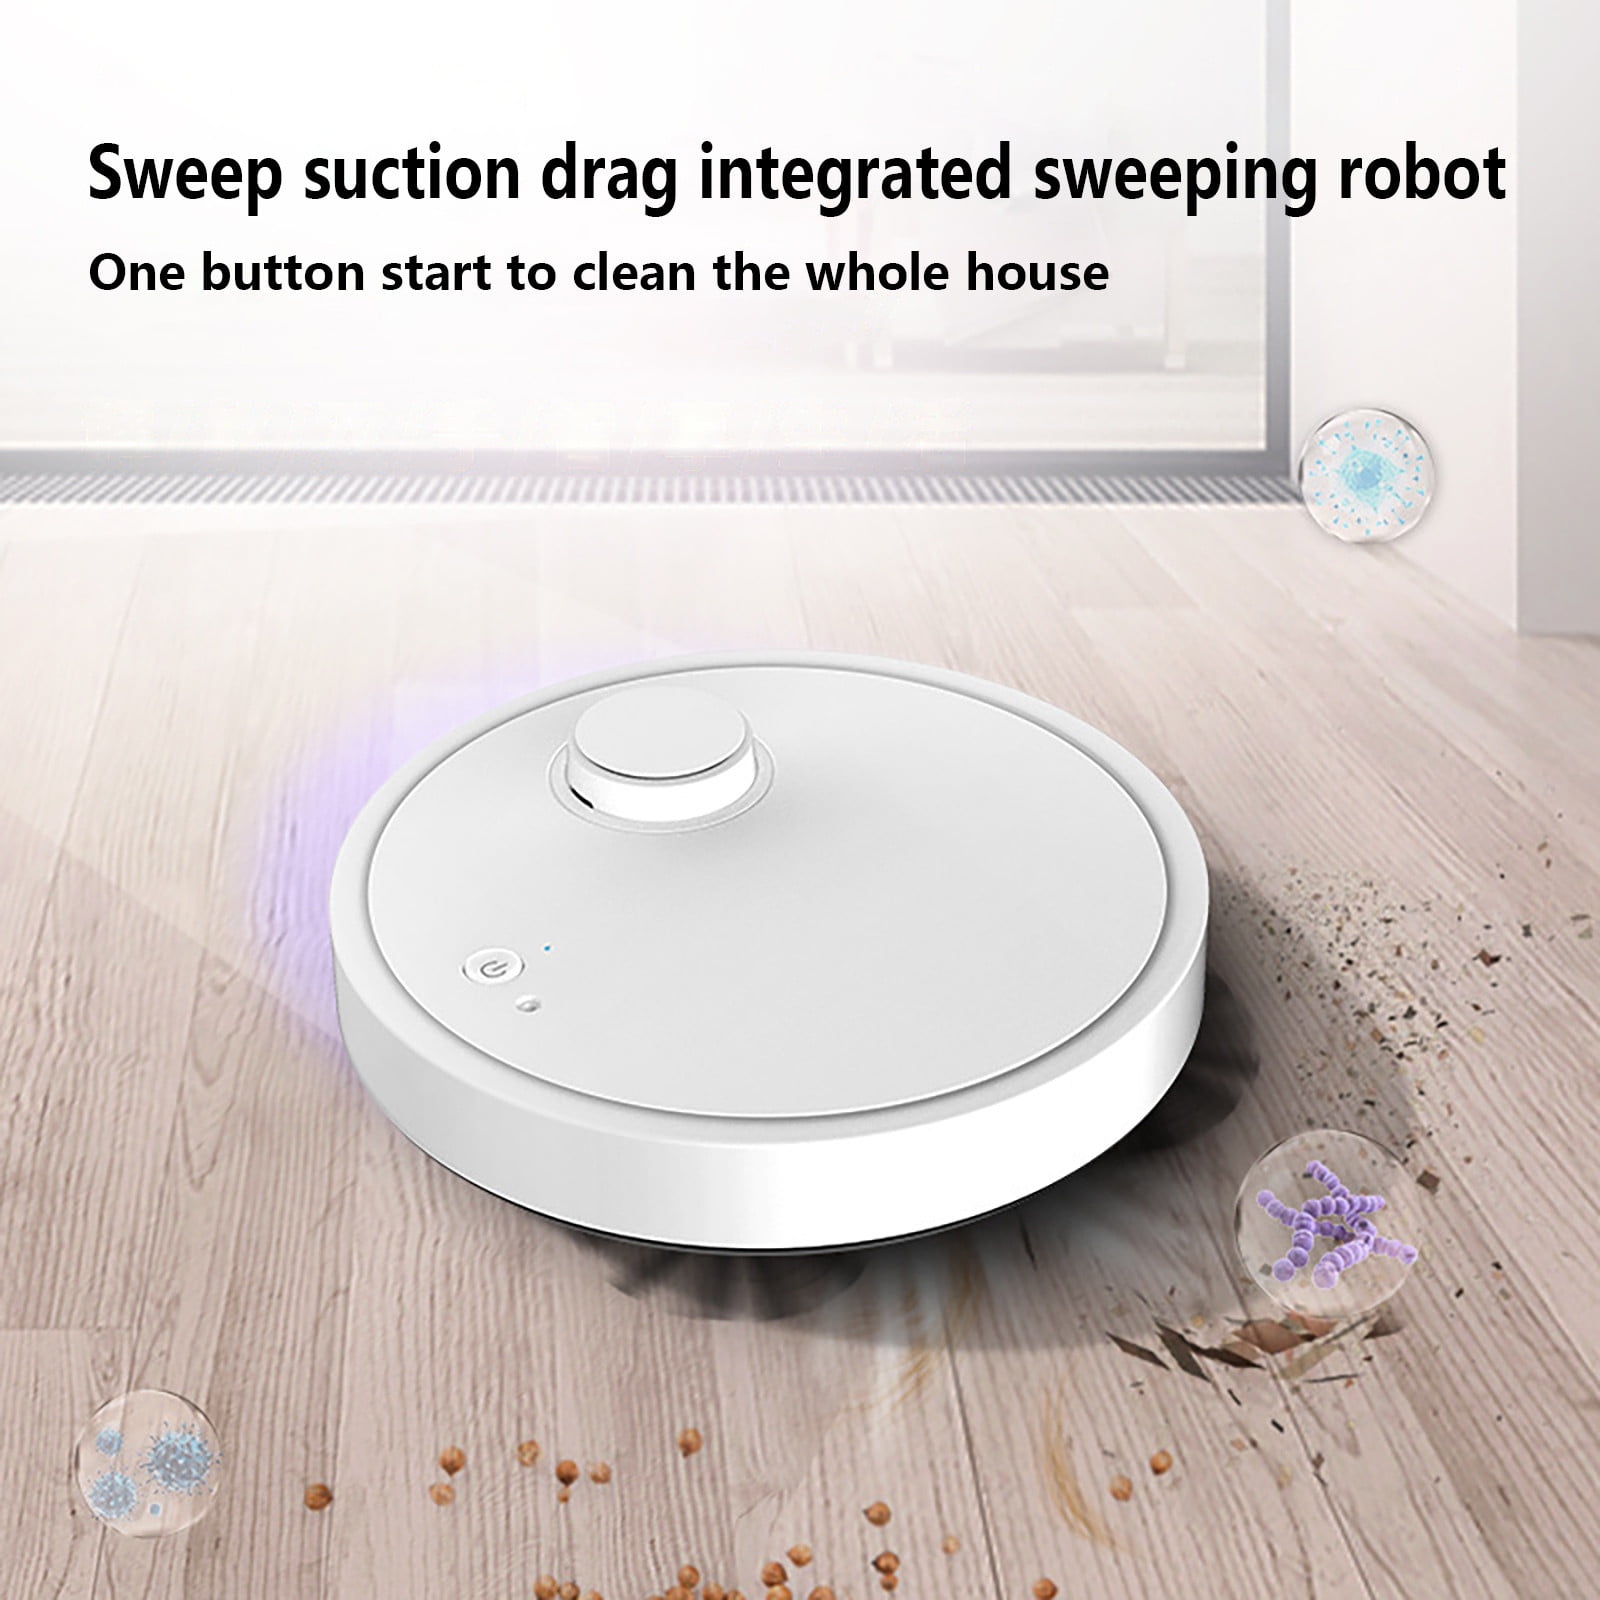 Automatic Robot Vacuum Cleaner - Self Detects Stairs Pet Hair Allergies Robotic Cleaning Carpet Hardwood Tile - Walmart.com